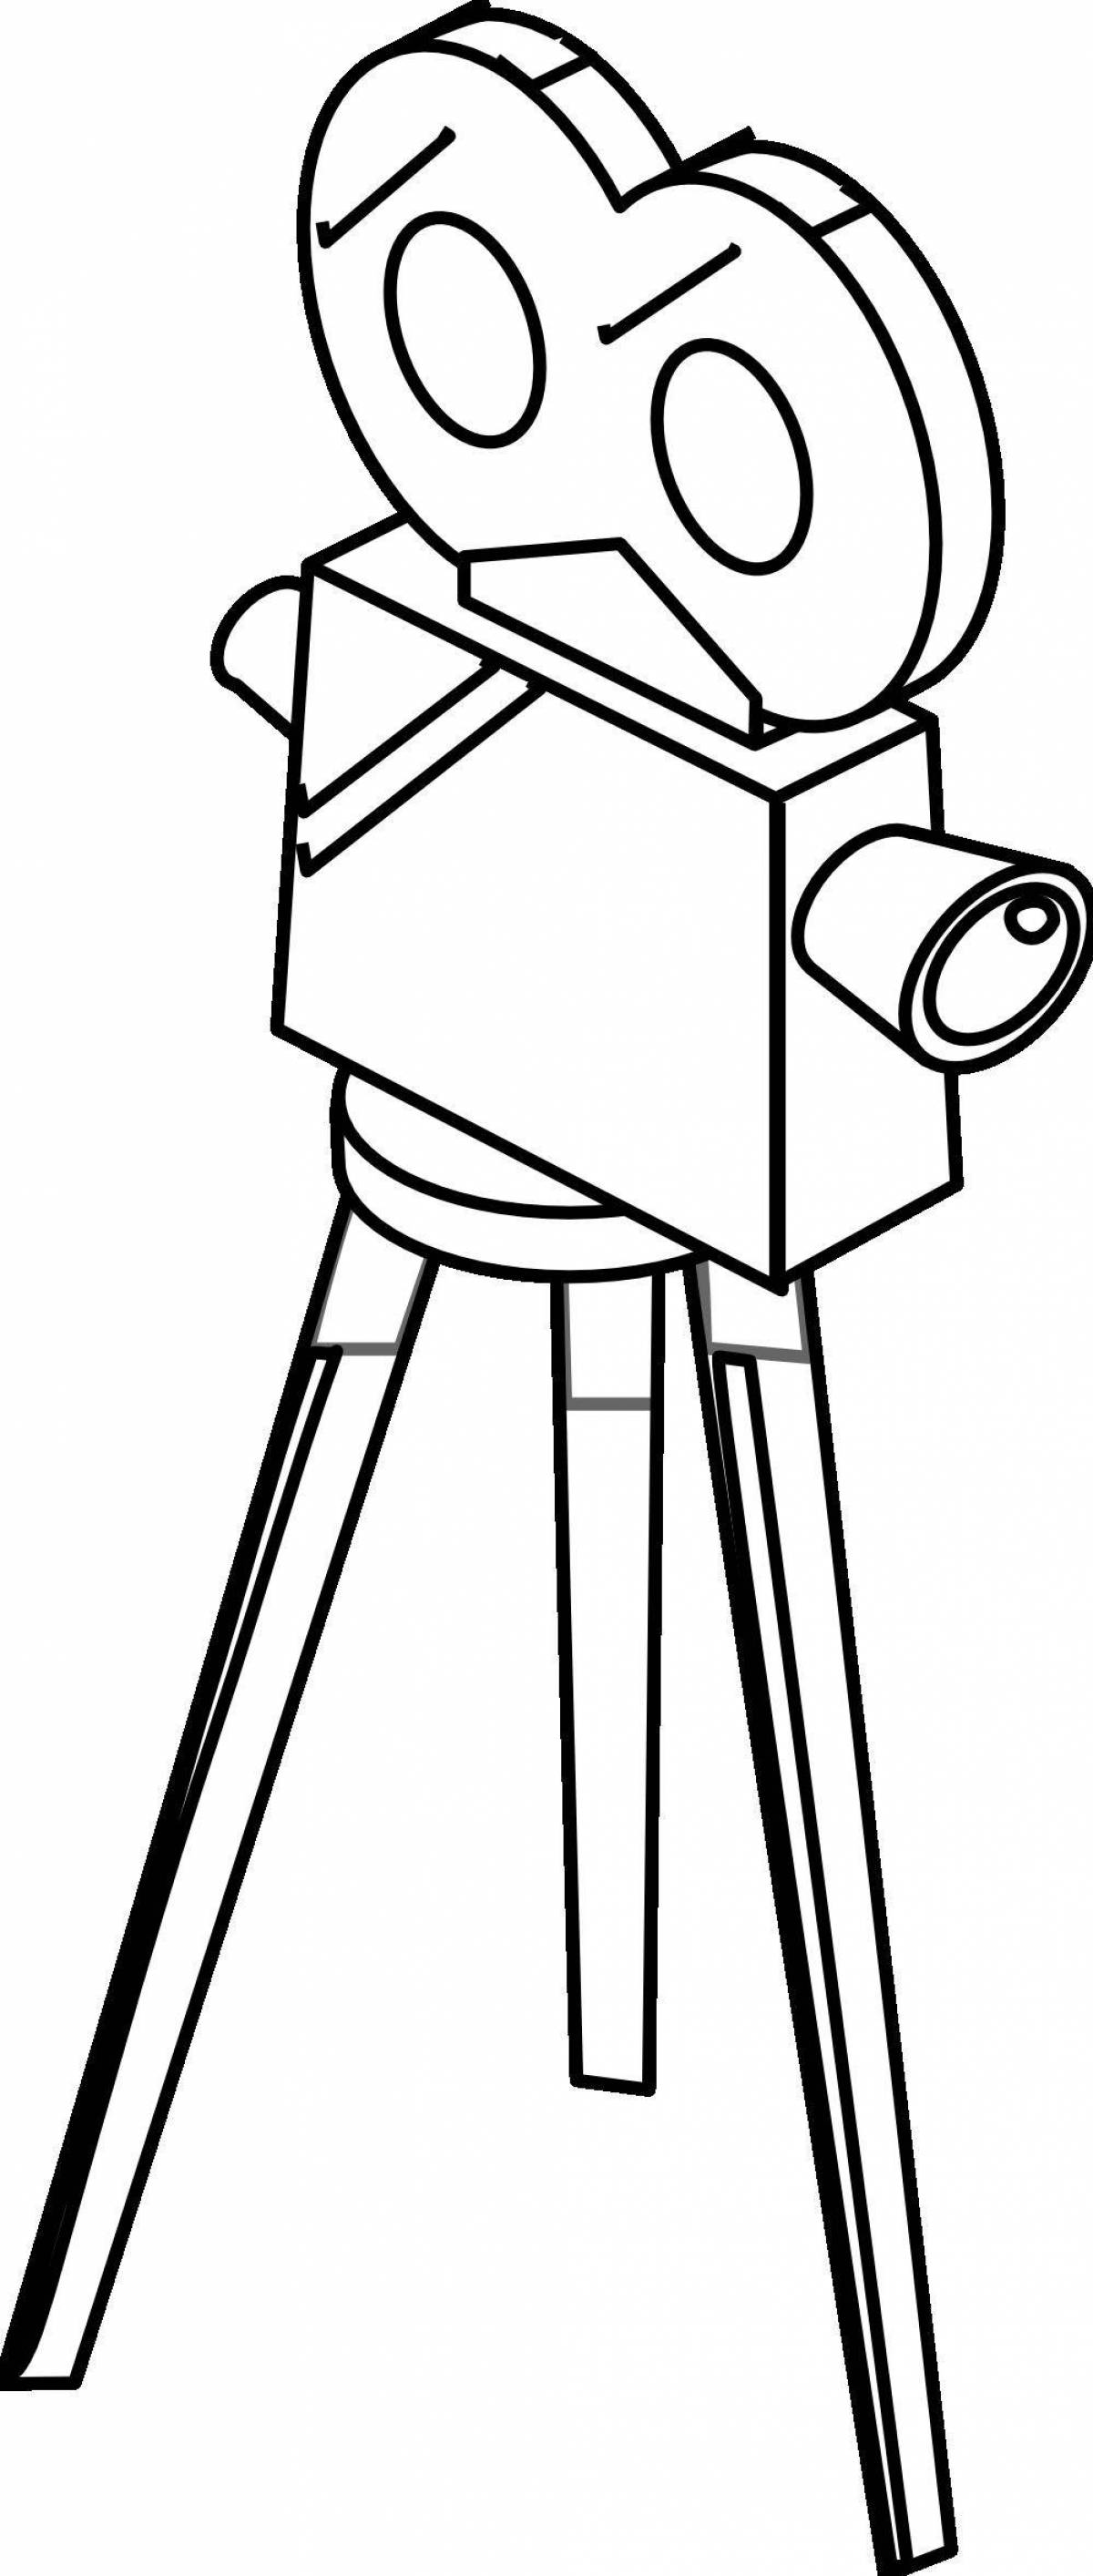 Live camera coloring page